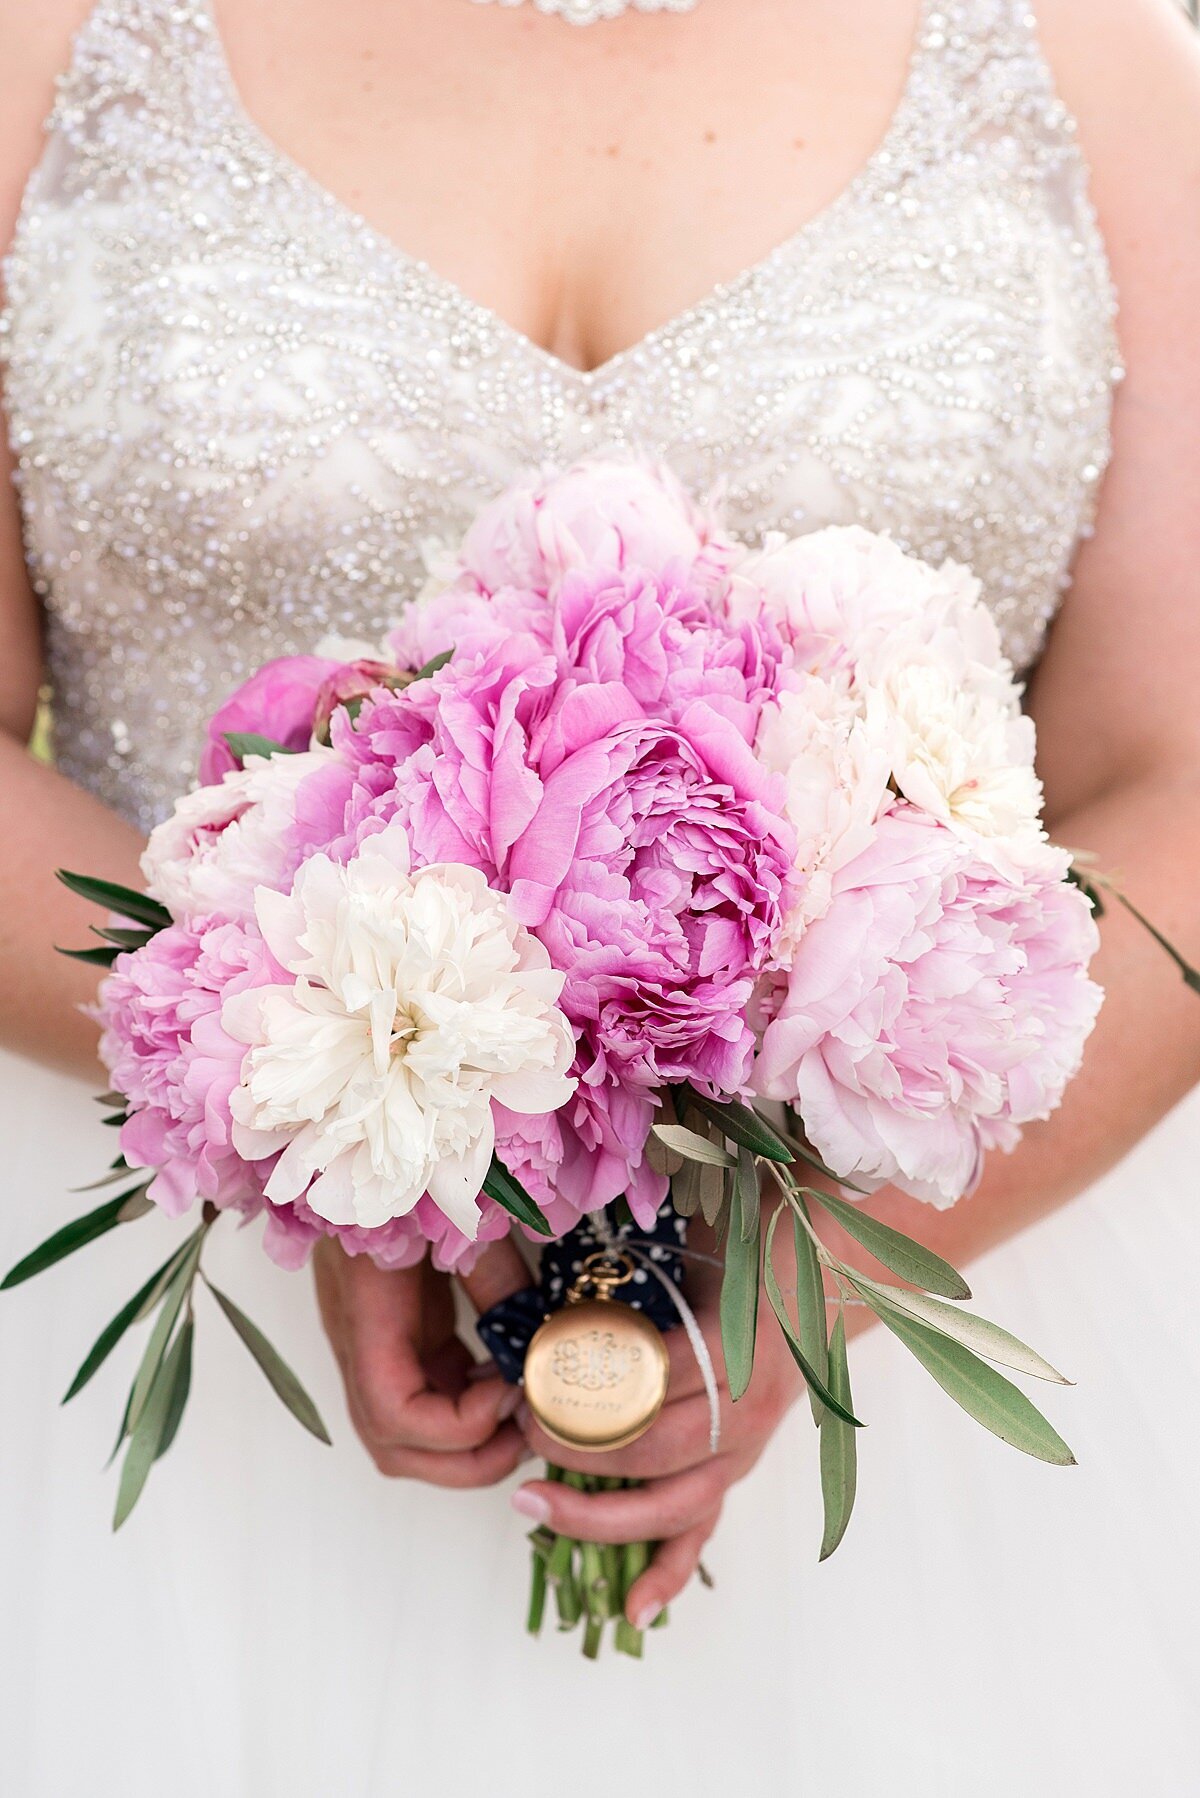 bride wearing a wedding dress with a beaded bodice and tulle skirt holding a small bouquet of pink peonies and white peonies with hints of greenery and an engraved gold pocket watch.